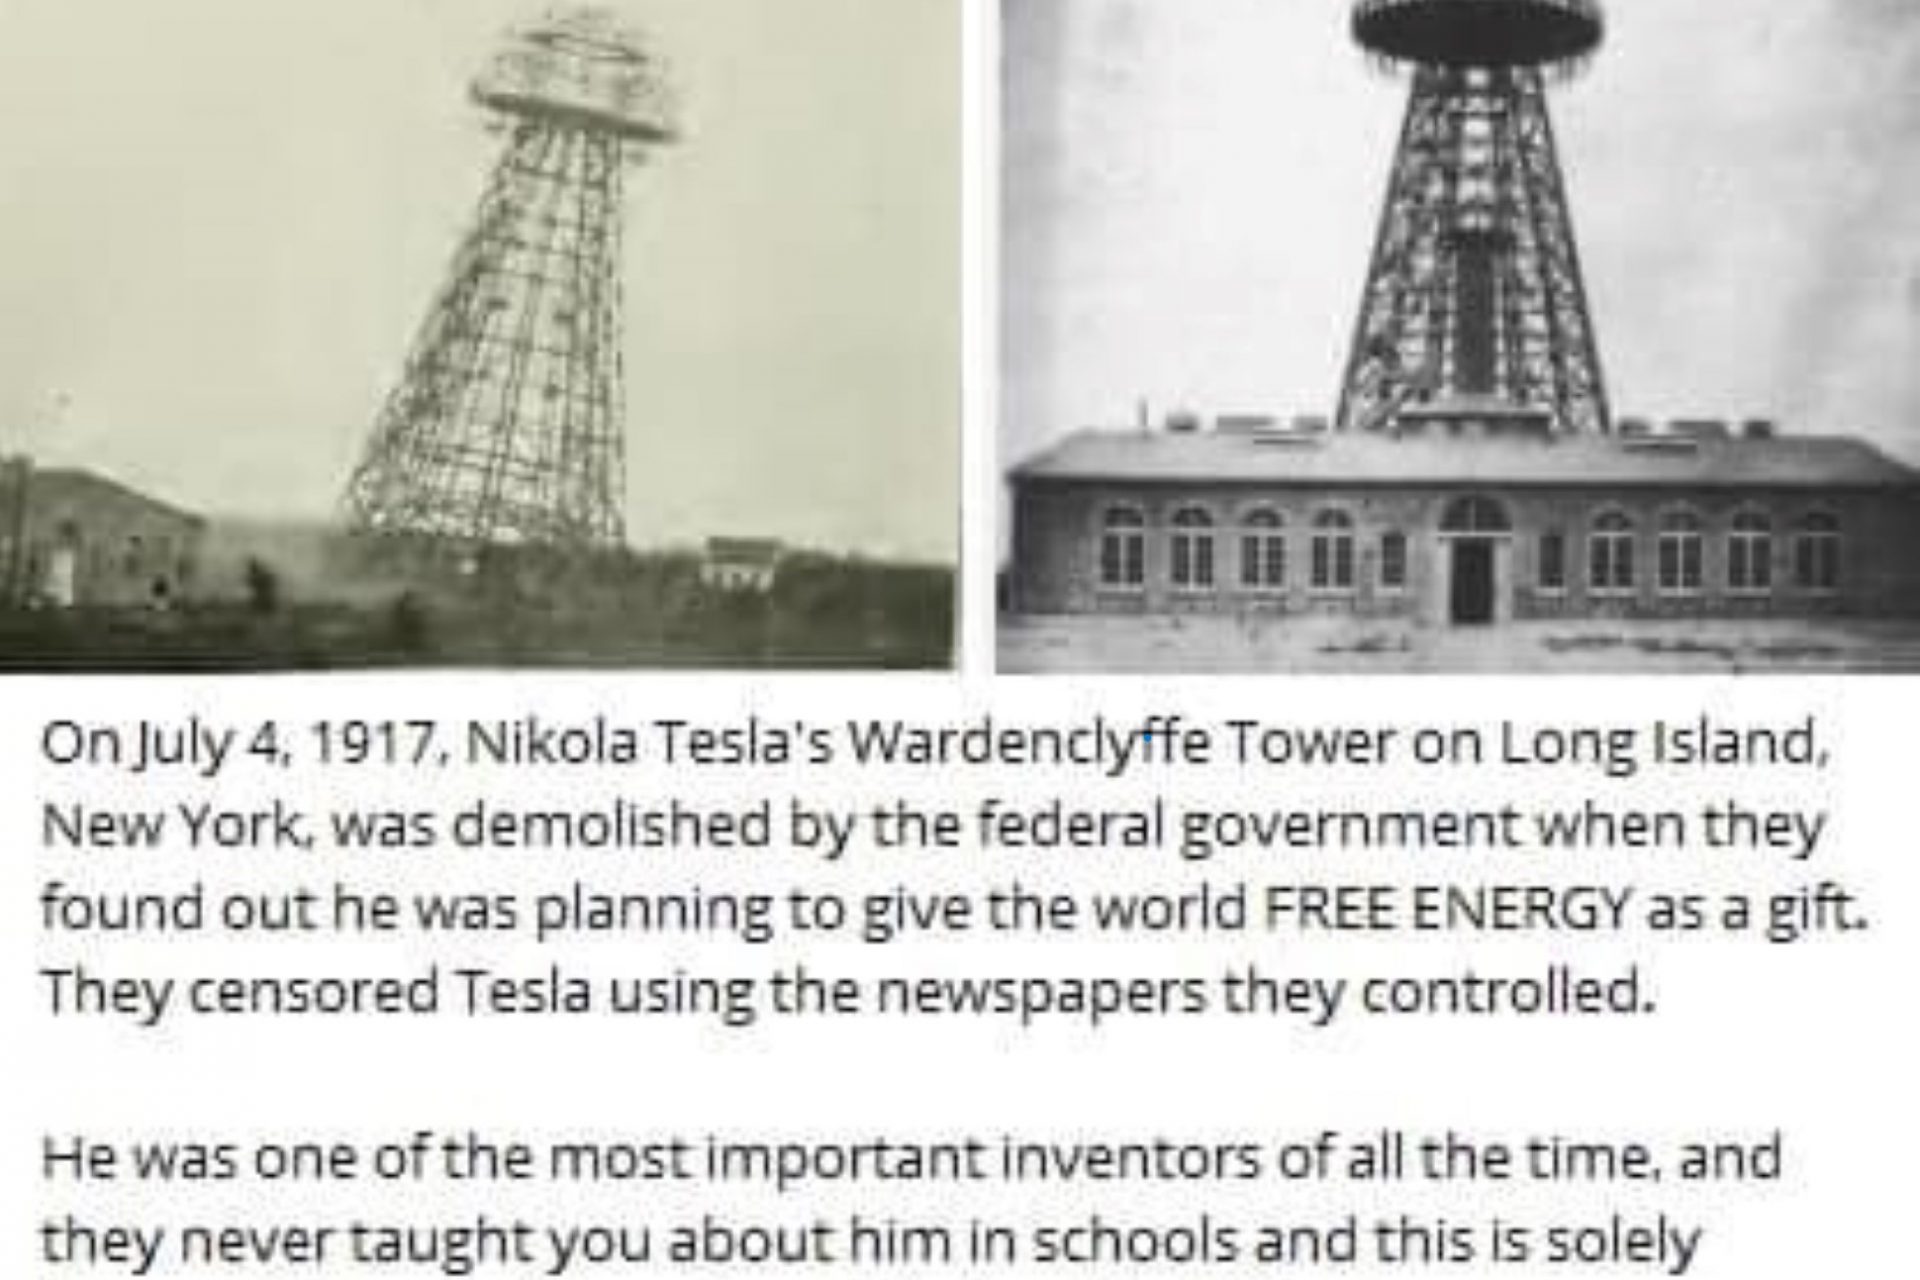 The Wardenclyffe tower conspiracy isn’t true